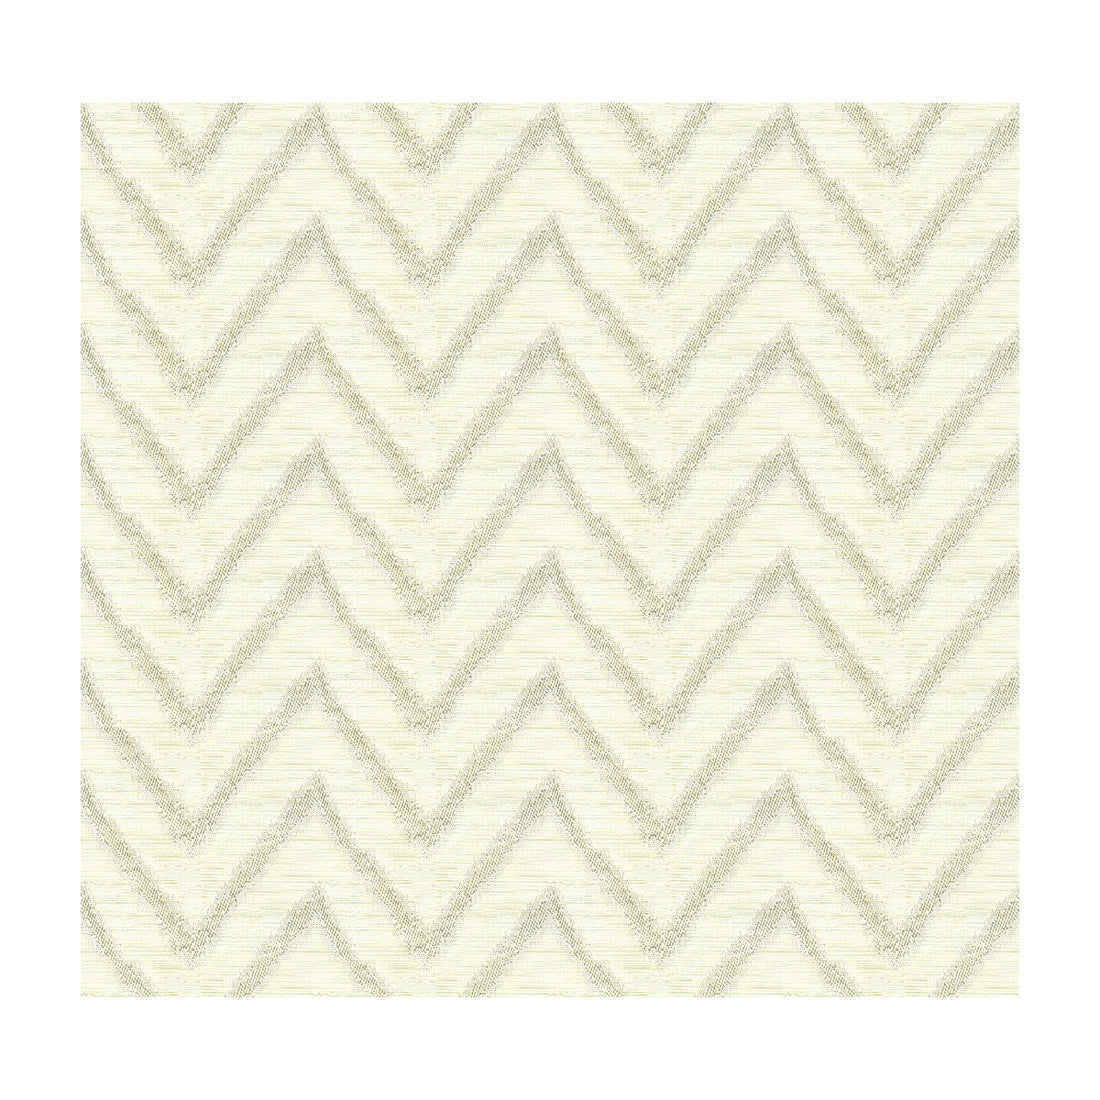 Ruzen fabric in cream color - pattern 4071.1.0 - by Kravet Design in the Constantinople collection